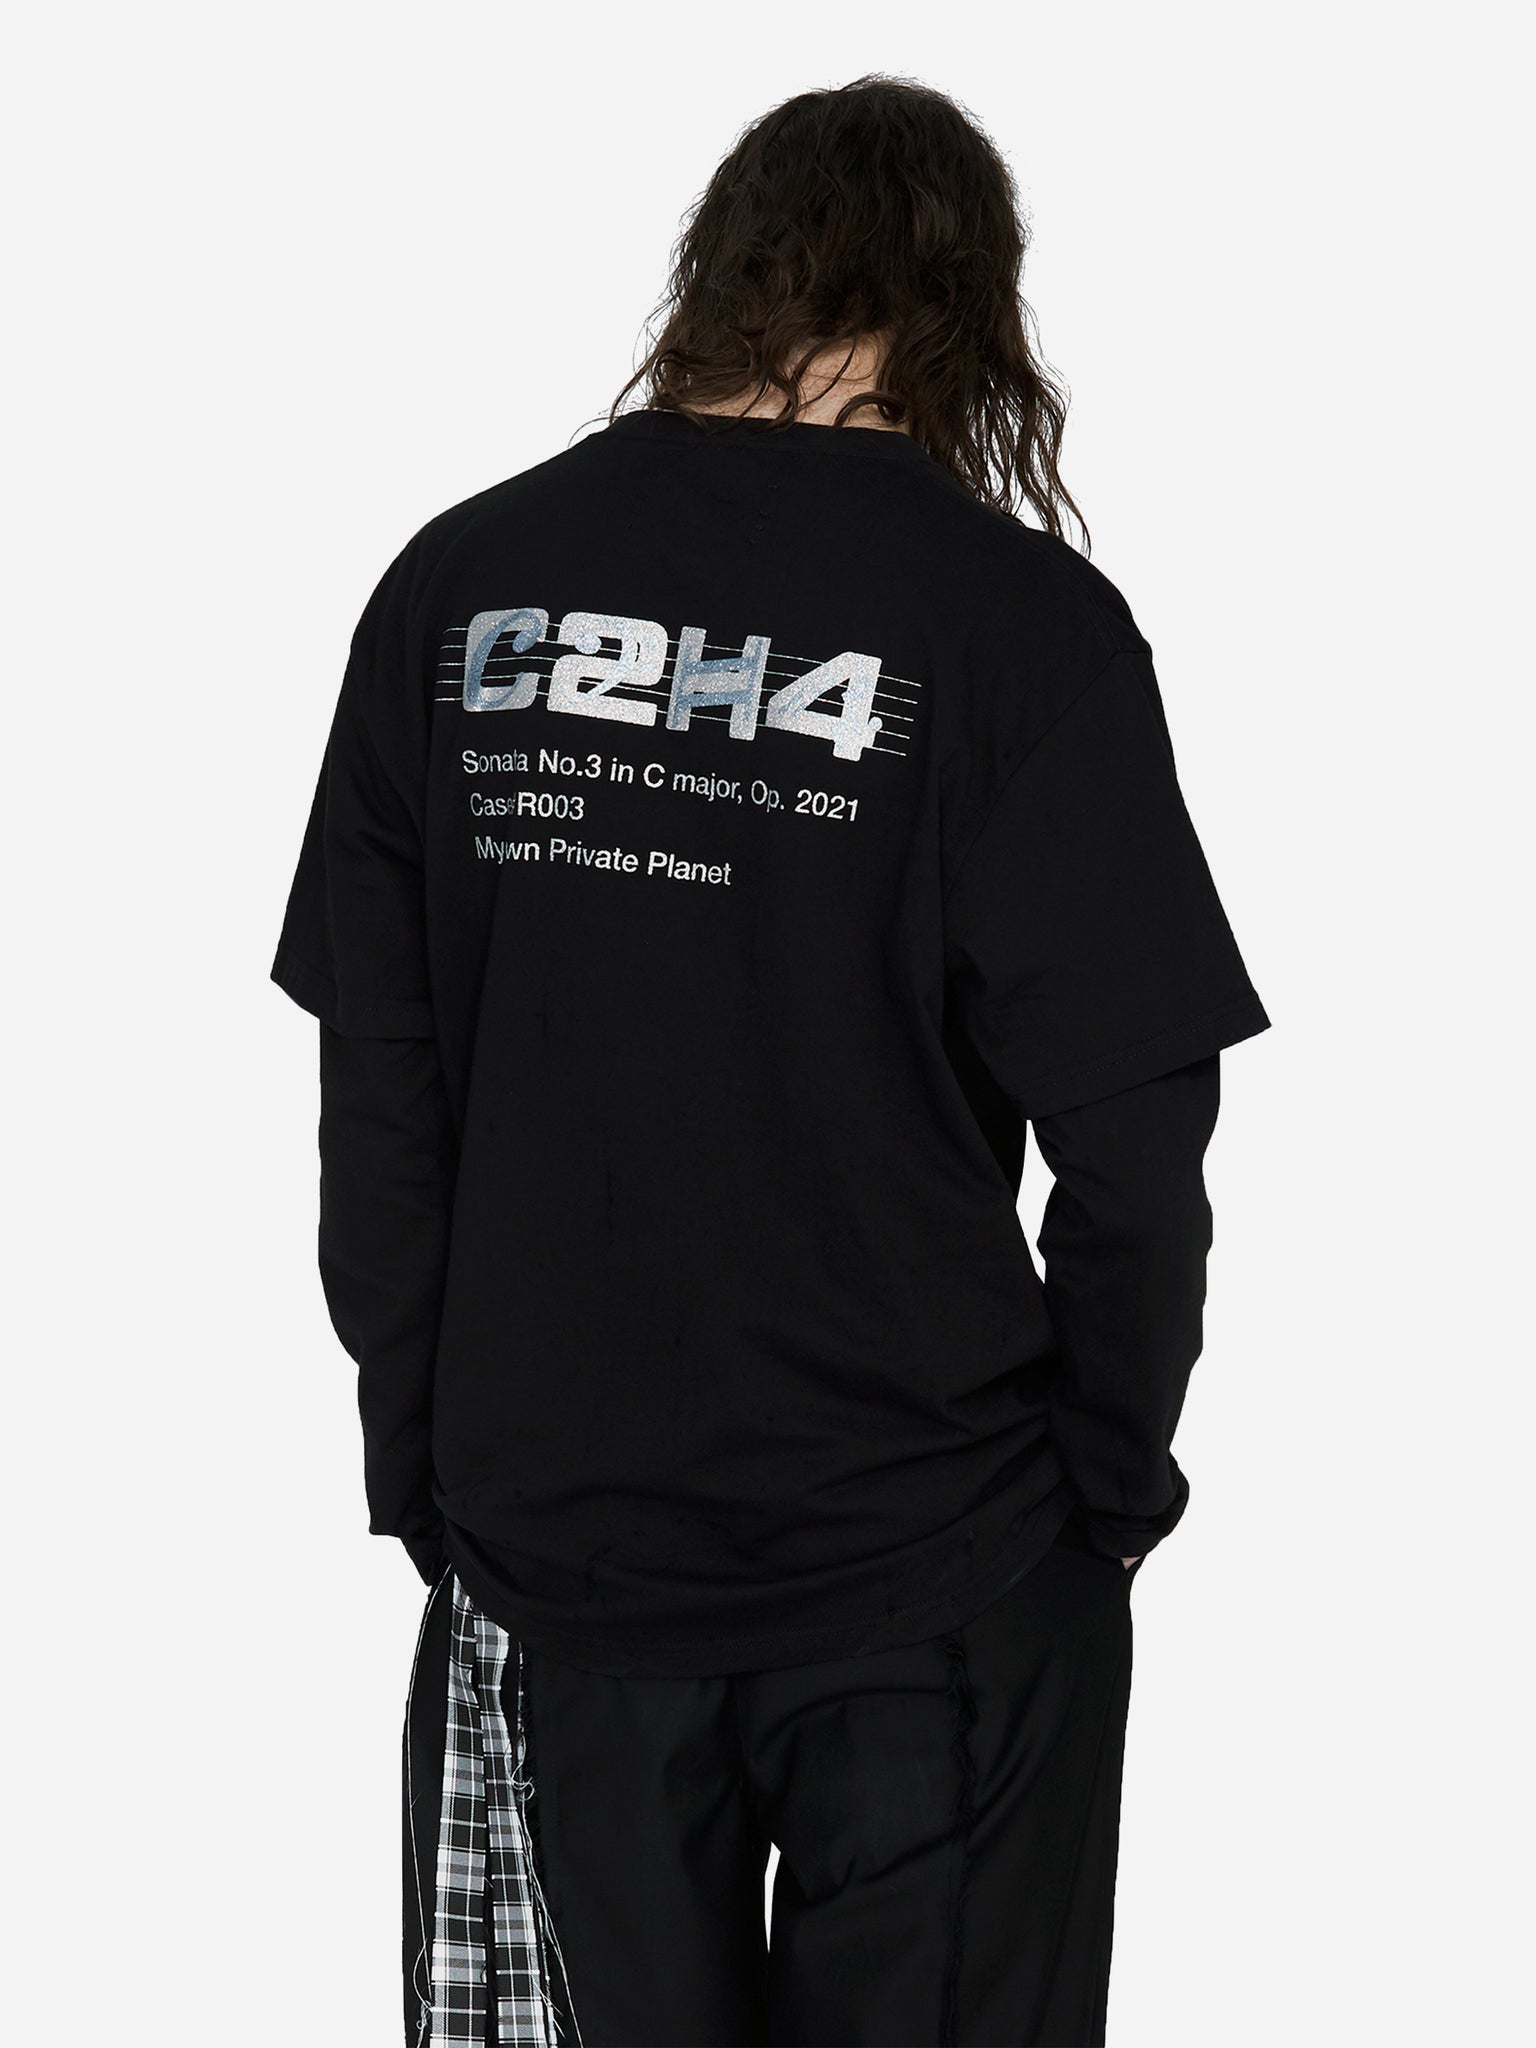 003 - Double Layer Long-Sleeve T-shirt - C2H4®